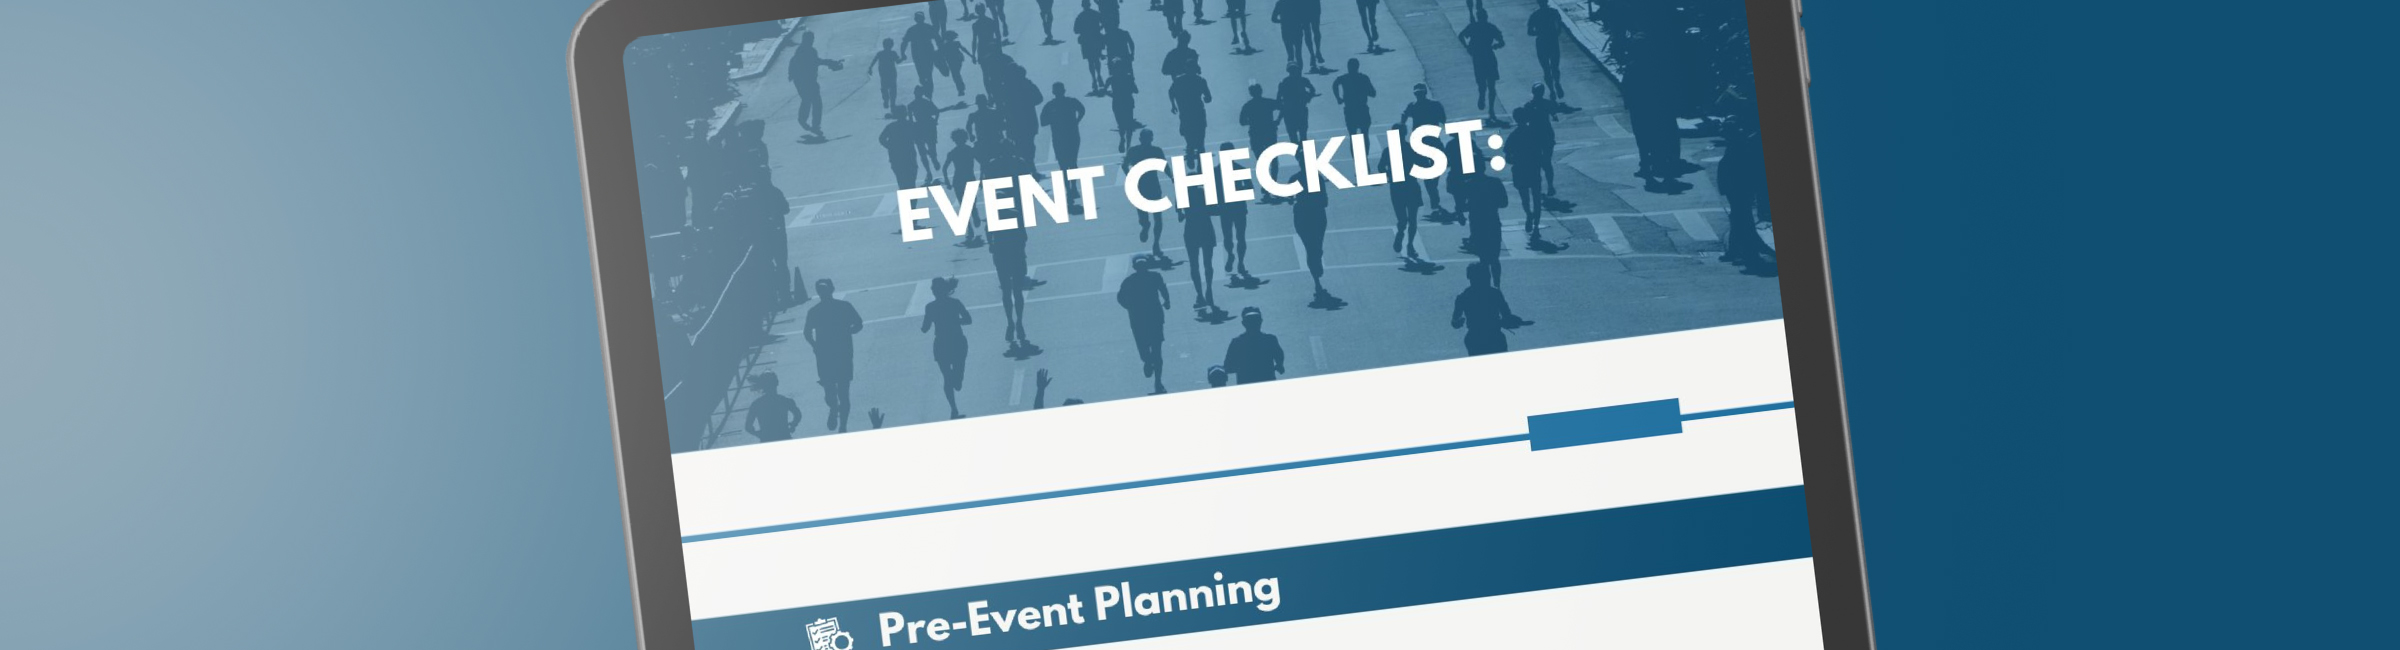 Ready to Host a Successful Endurance Event? Get Our Ultimate Organizer Checklist!